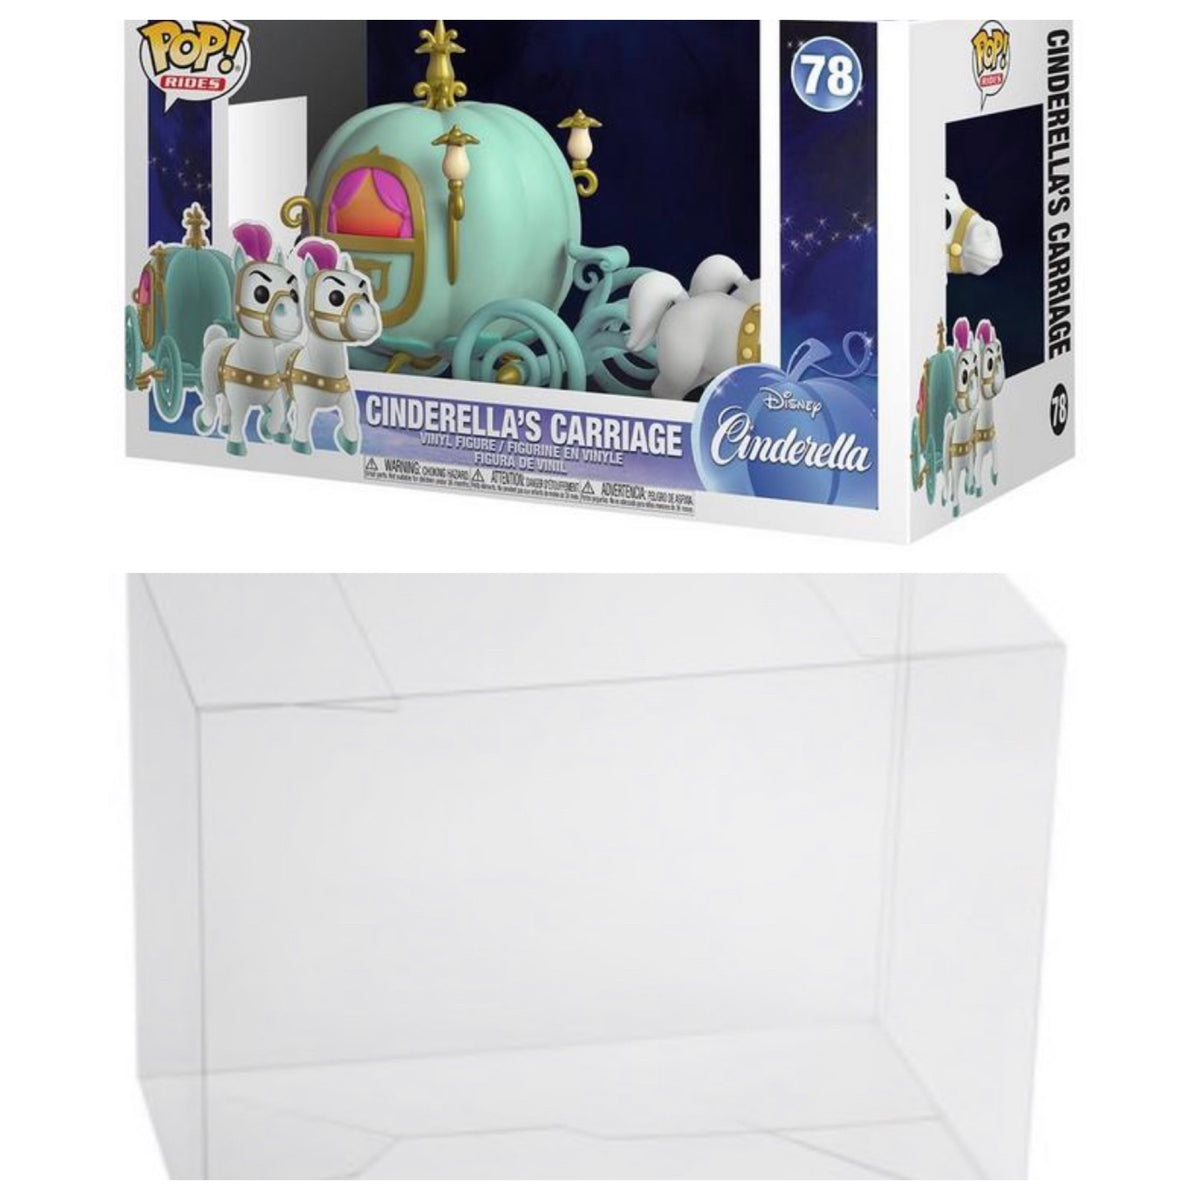 Cinderella Carriage Ride Funko POP! Box Protector made with  thi –  Kollector Protector